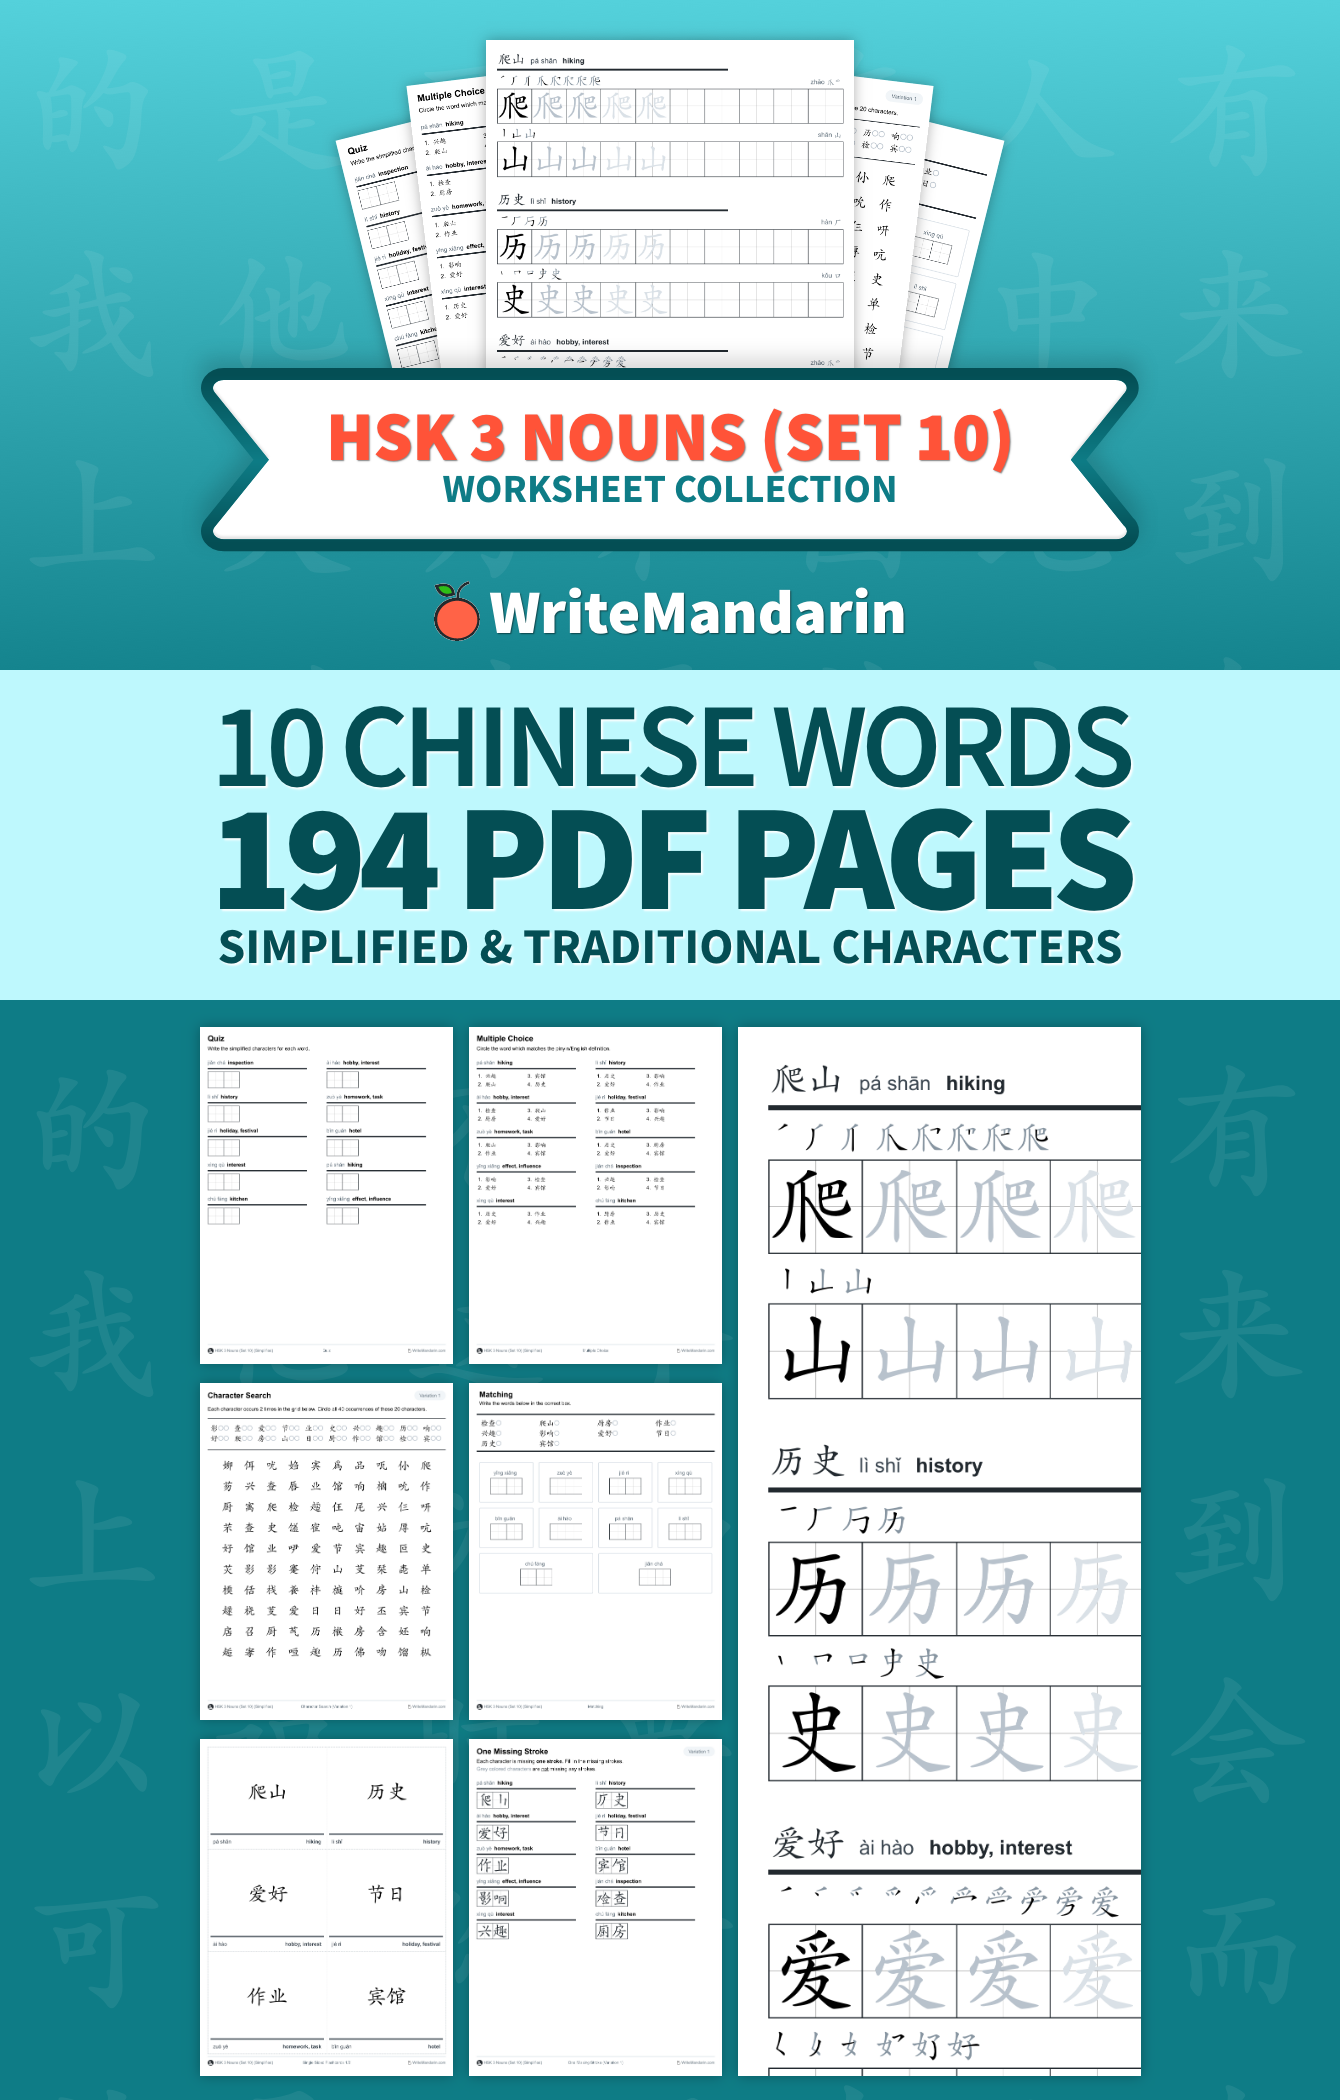 Preview image of HSK 3 Nouns (Set 10) worksheet collection